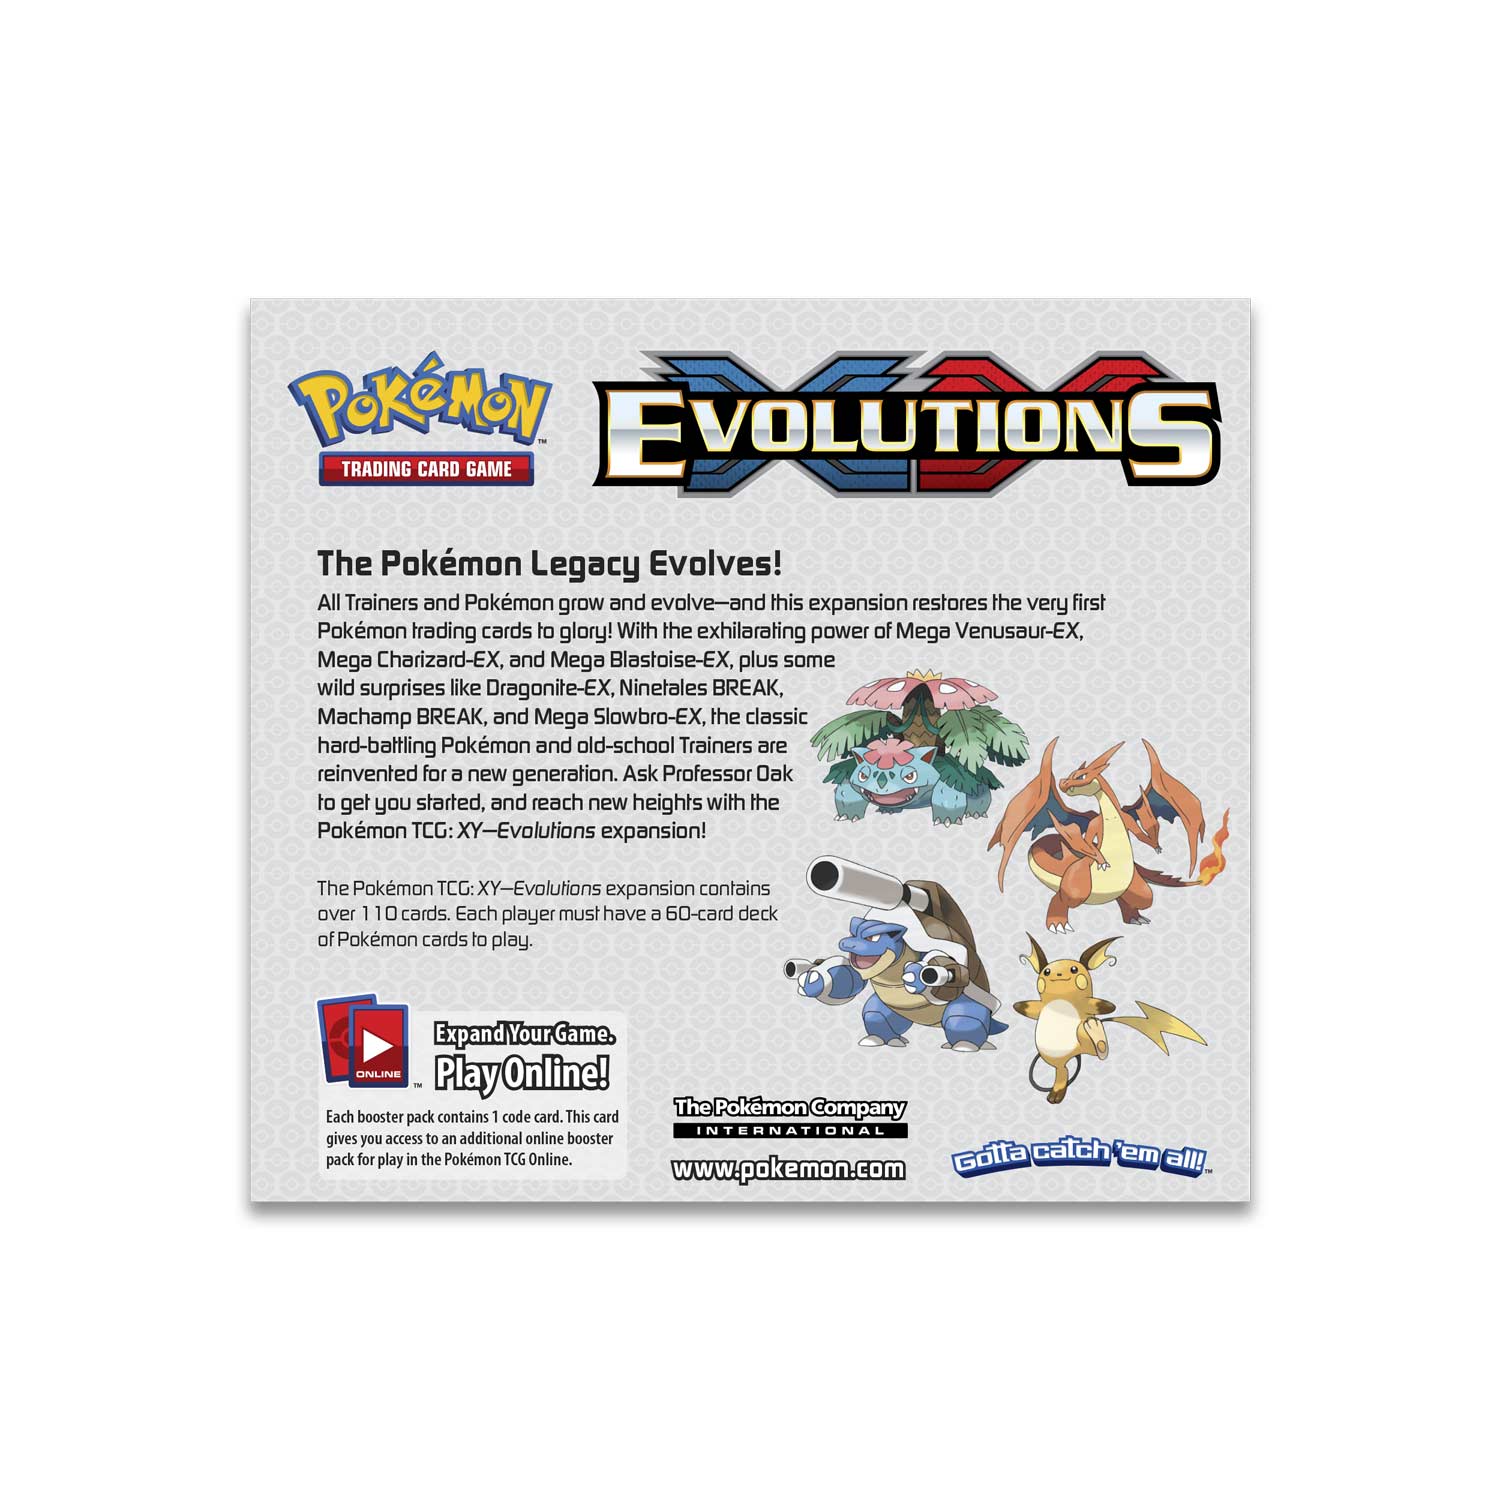 Brand New And Sealed! Pokemon XY12 Evolutions 4 Booster Packs All 4 Types